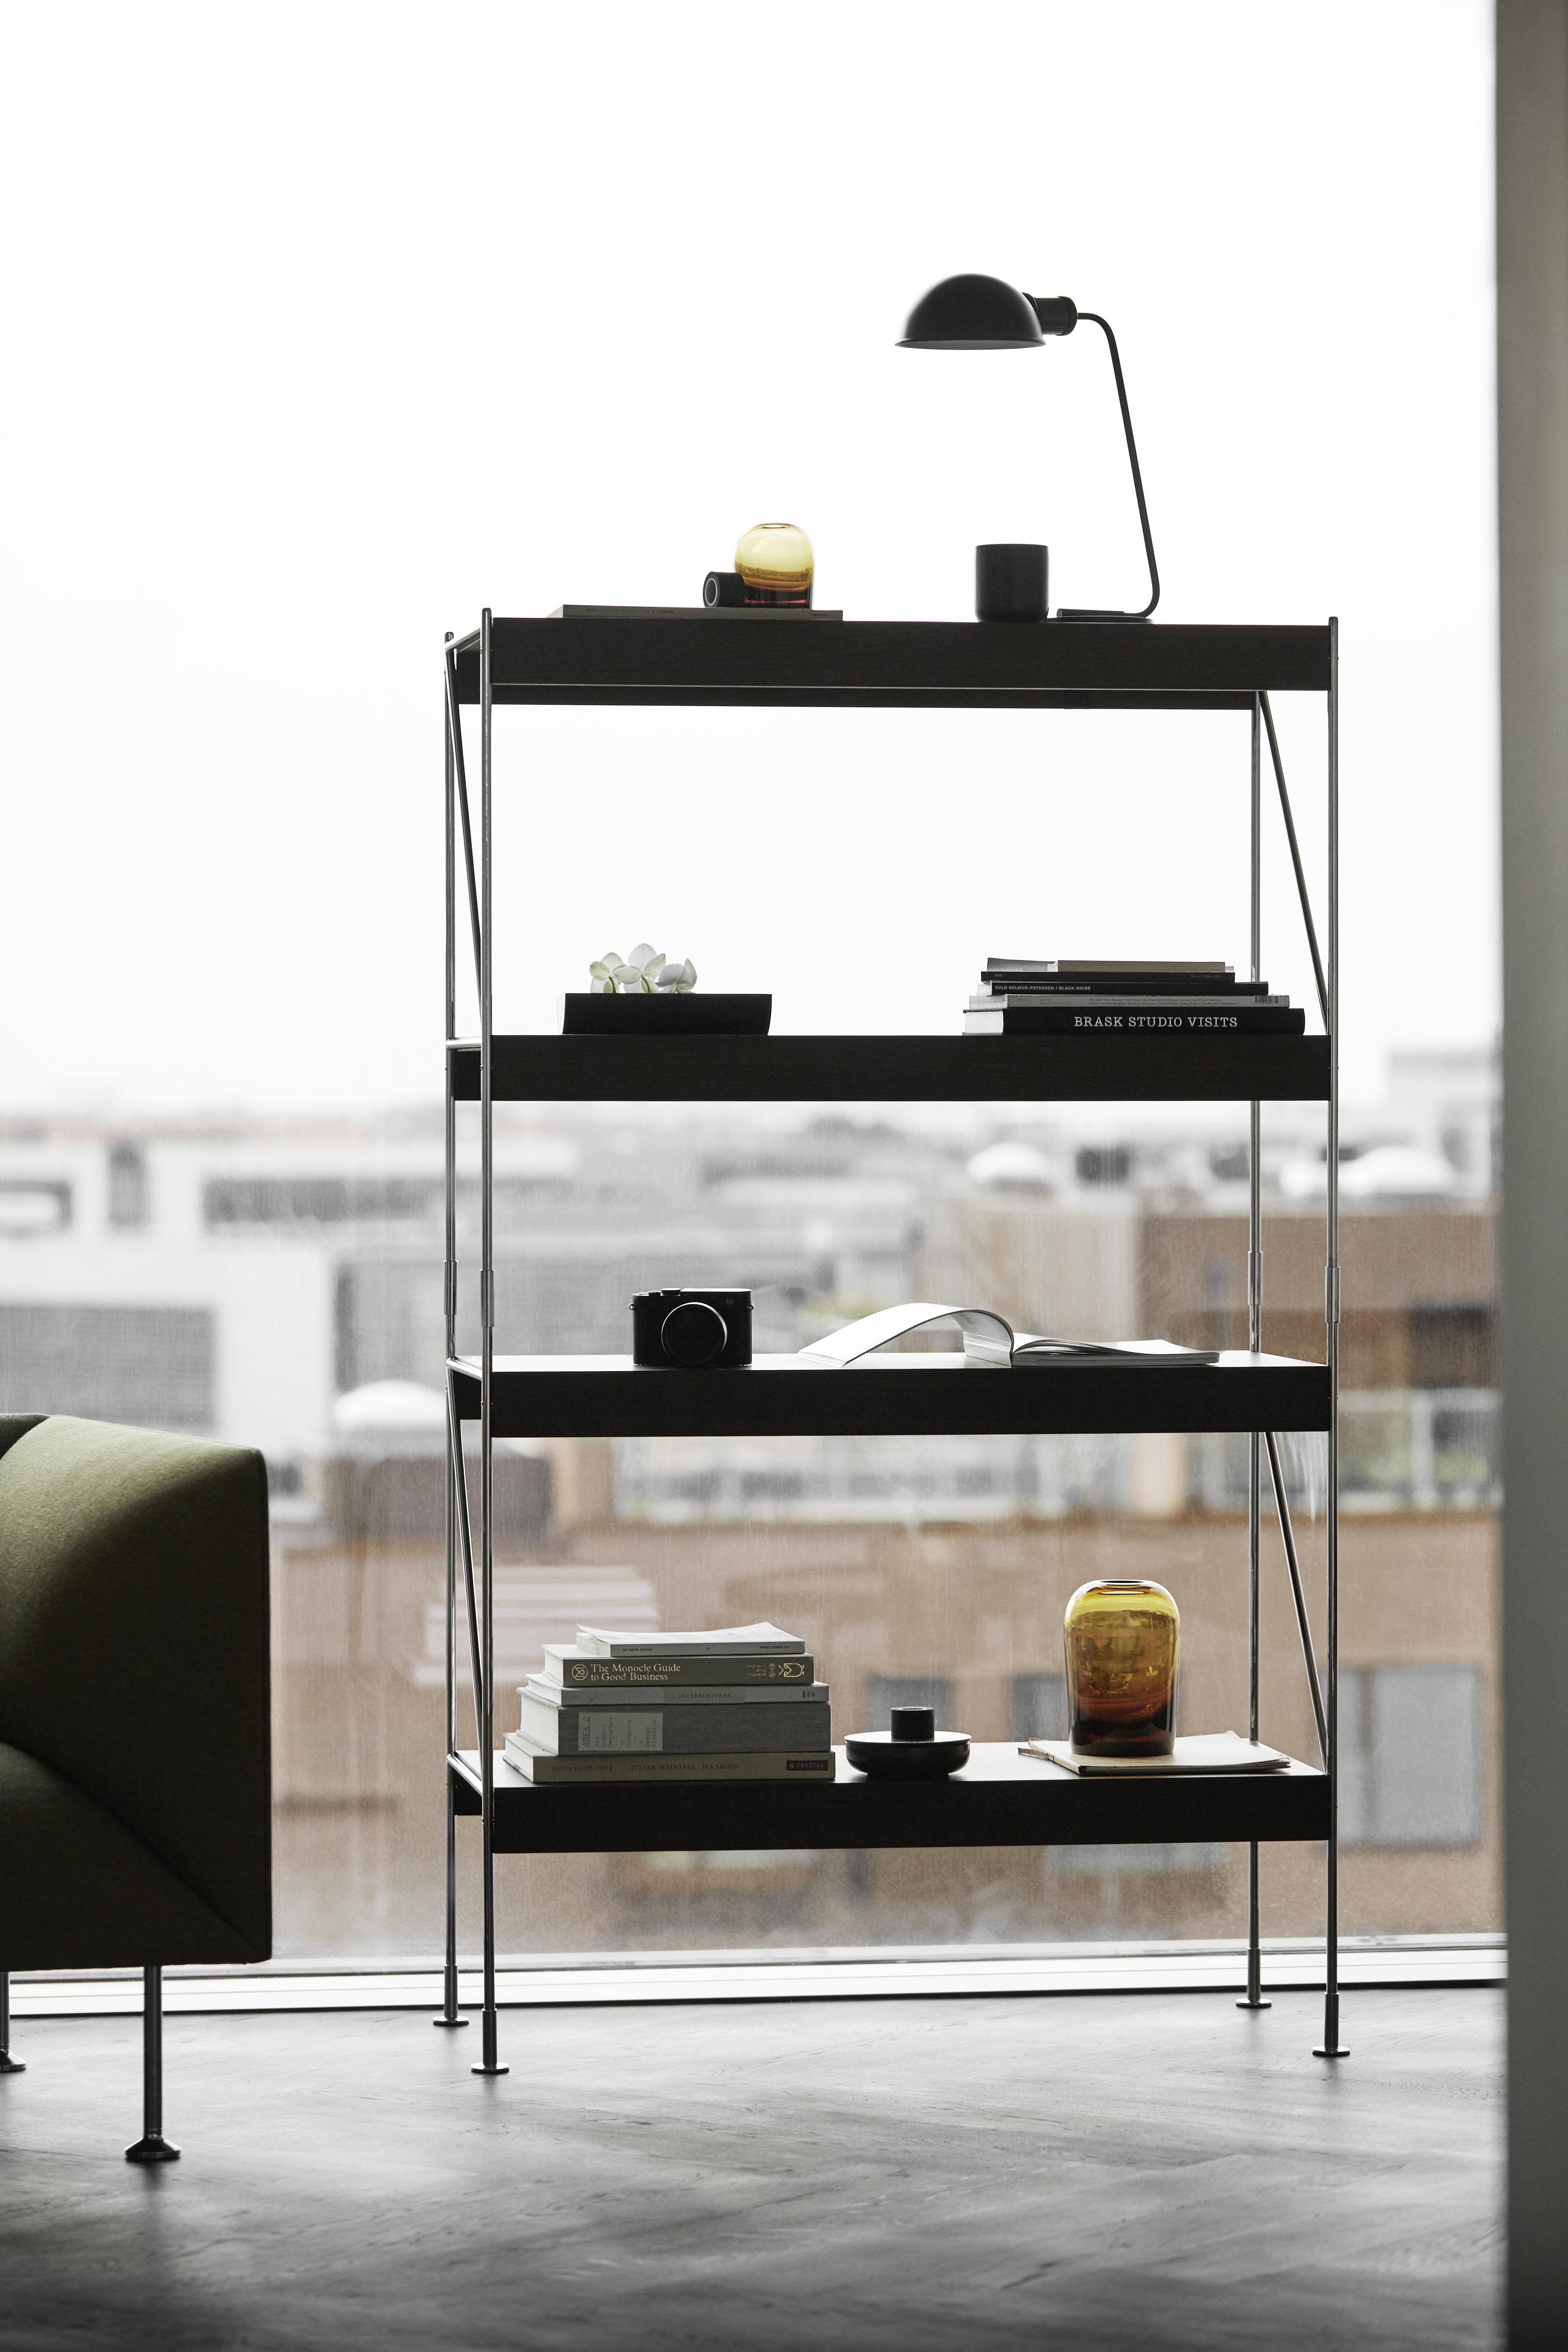 Zet is a smart shelving system with a light, airy, and minimalistic appearance. The whole system consists of two components only: the wooden U-shaped shelves and the metal frame construction. By assembling those two parts, you are able to build